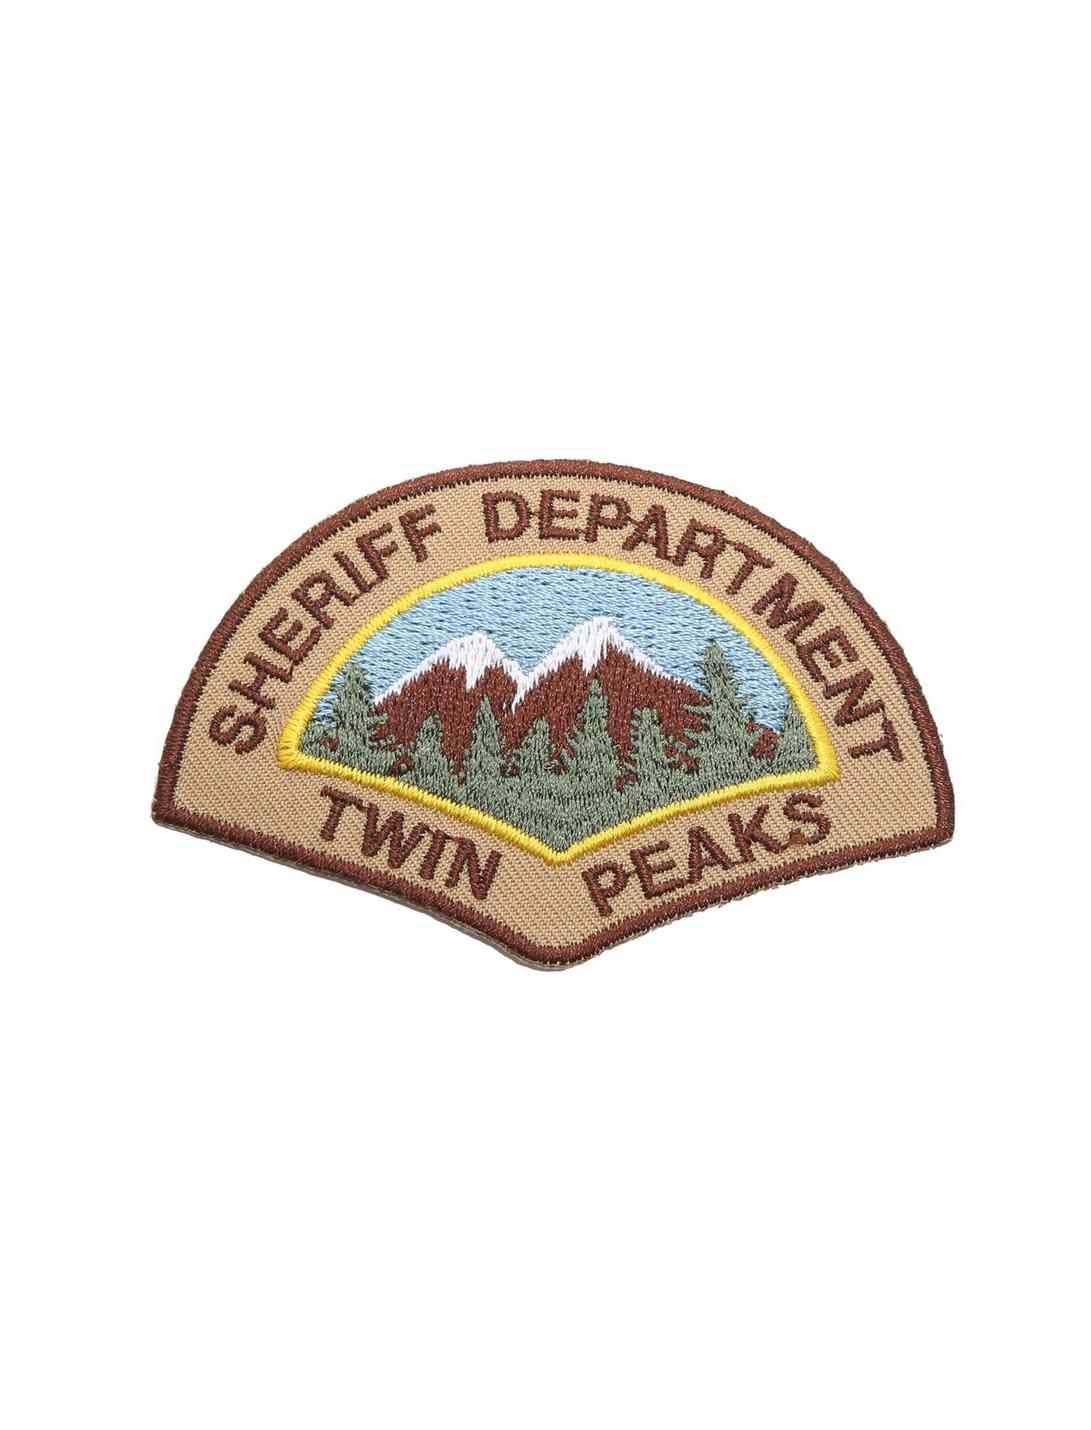 Twin Peaks Sheriff Department Iron-On Patch, , hi-res